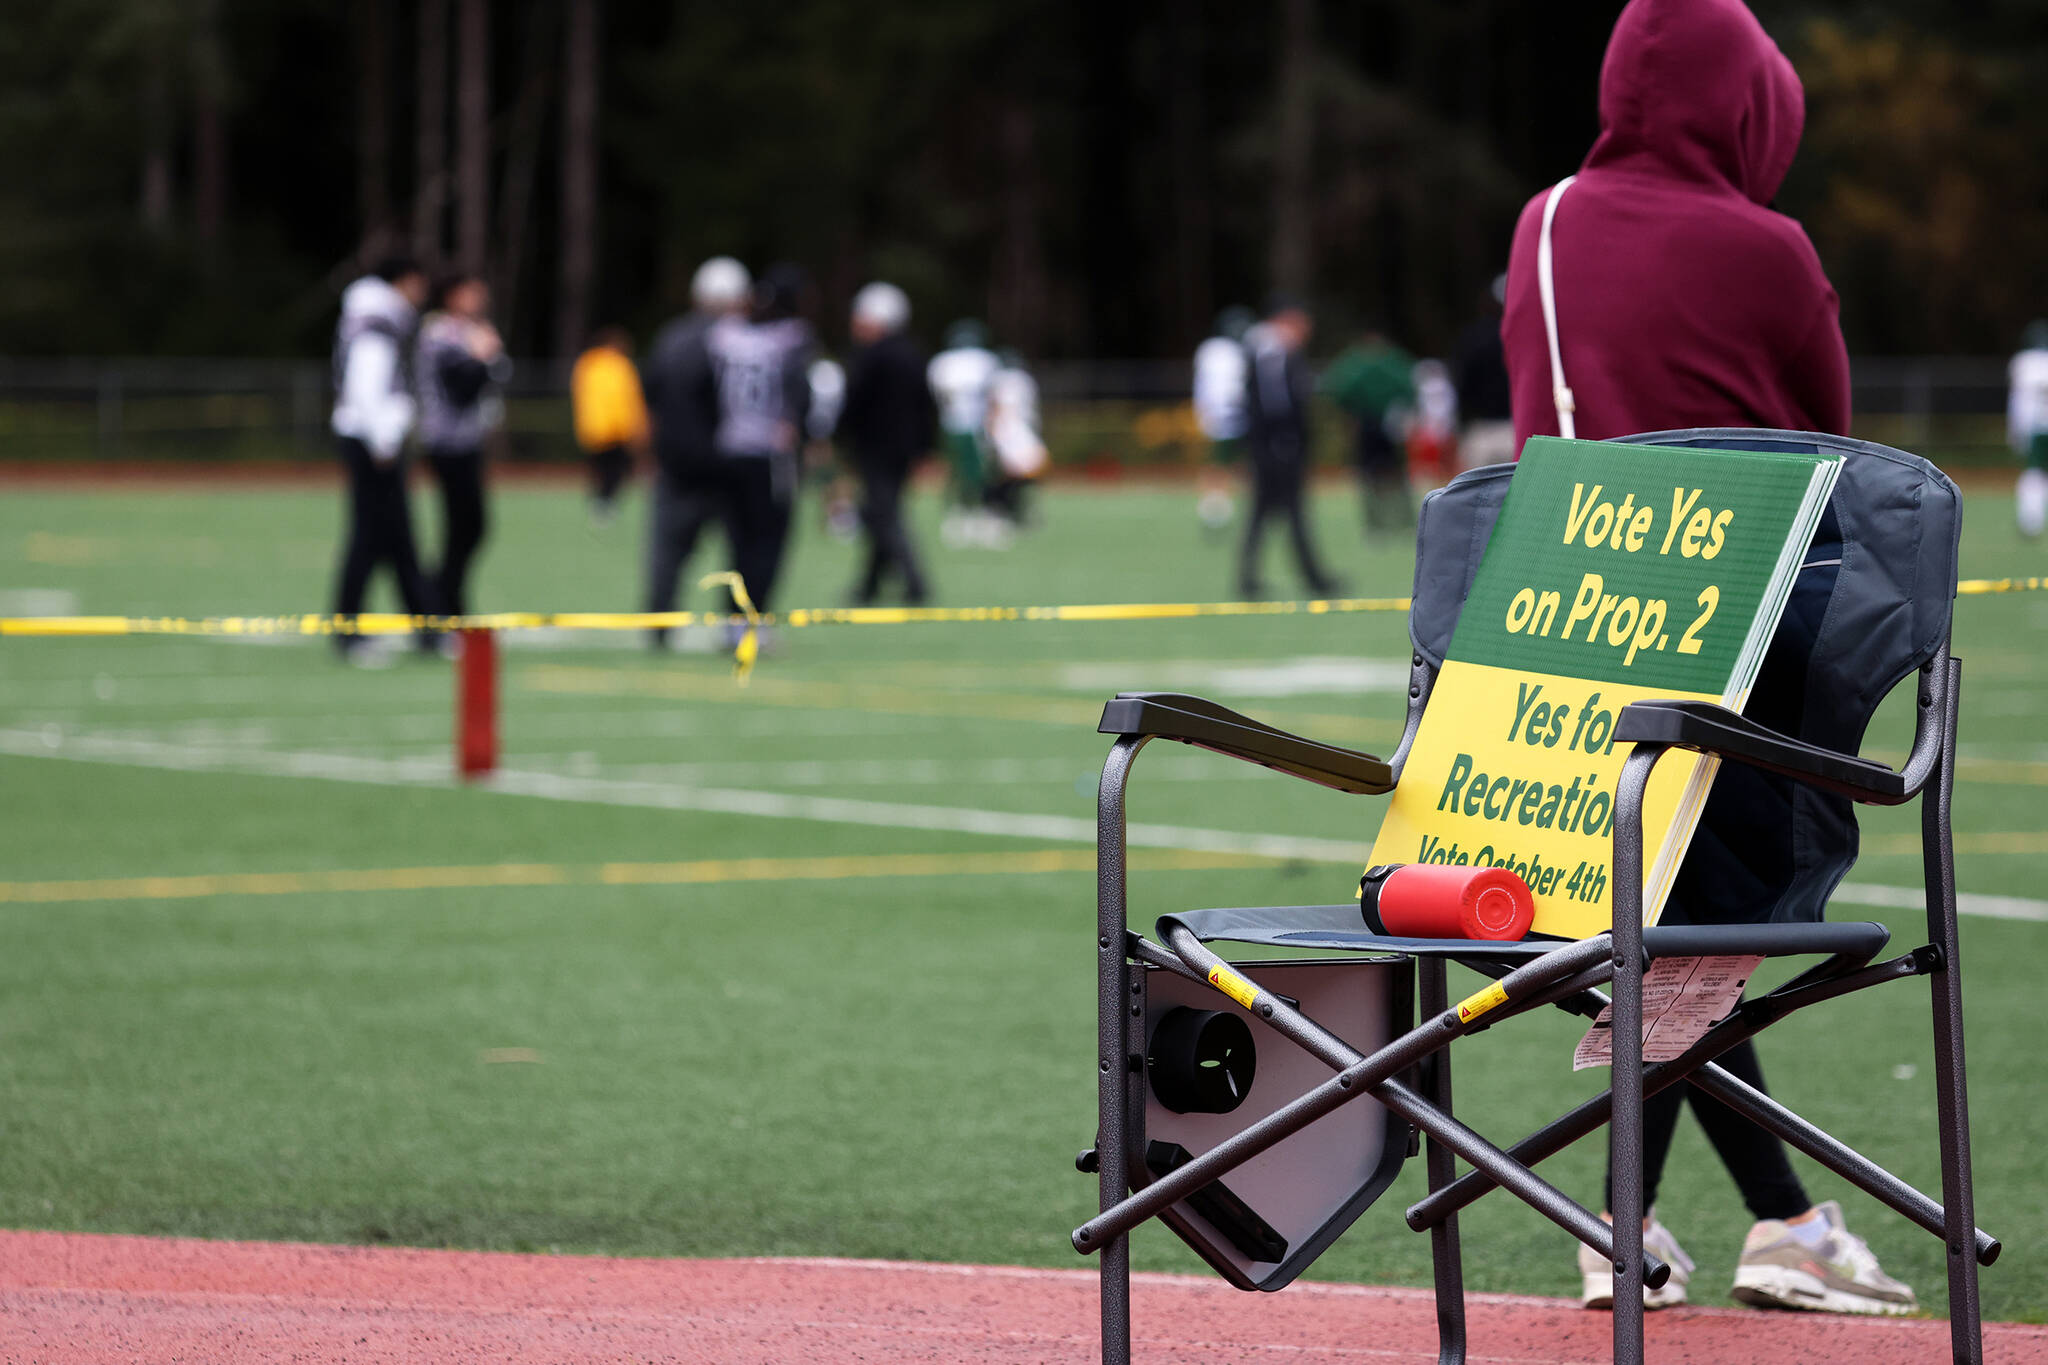 Signs urging Saturday football game attendees to vote in favor of Proposition 2 sit on a chair on the track at Adair-Kennedy Memorial Park. (Ben Hohenstatt / Juneau Empire)